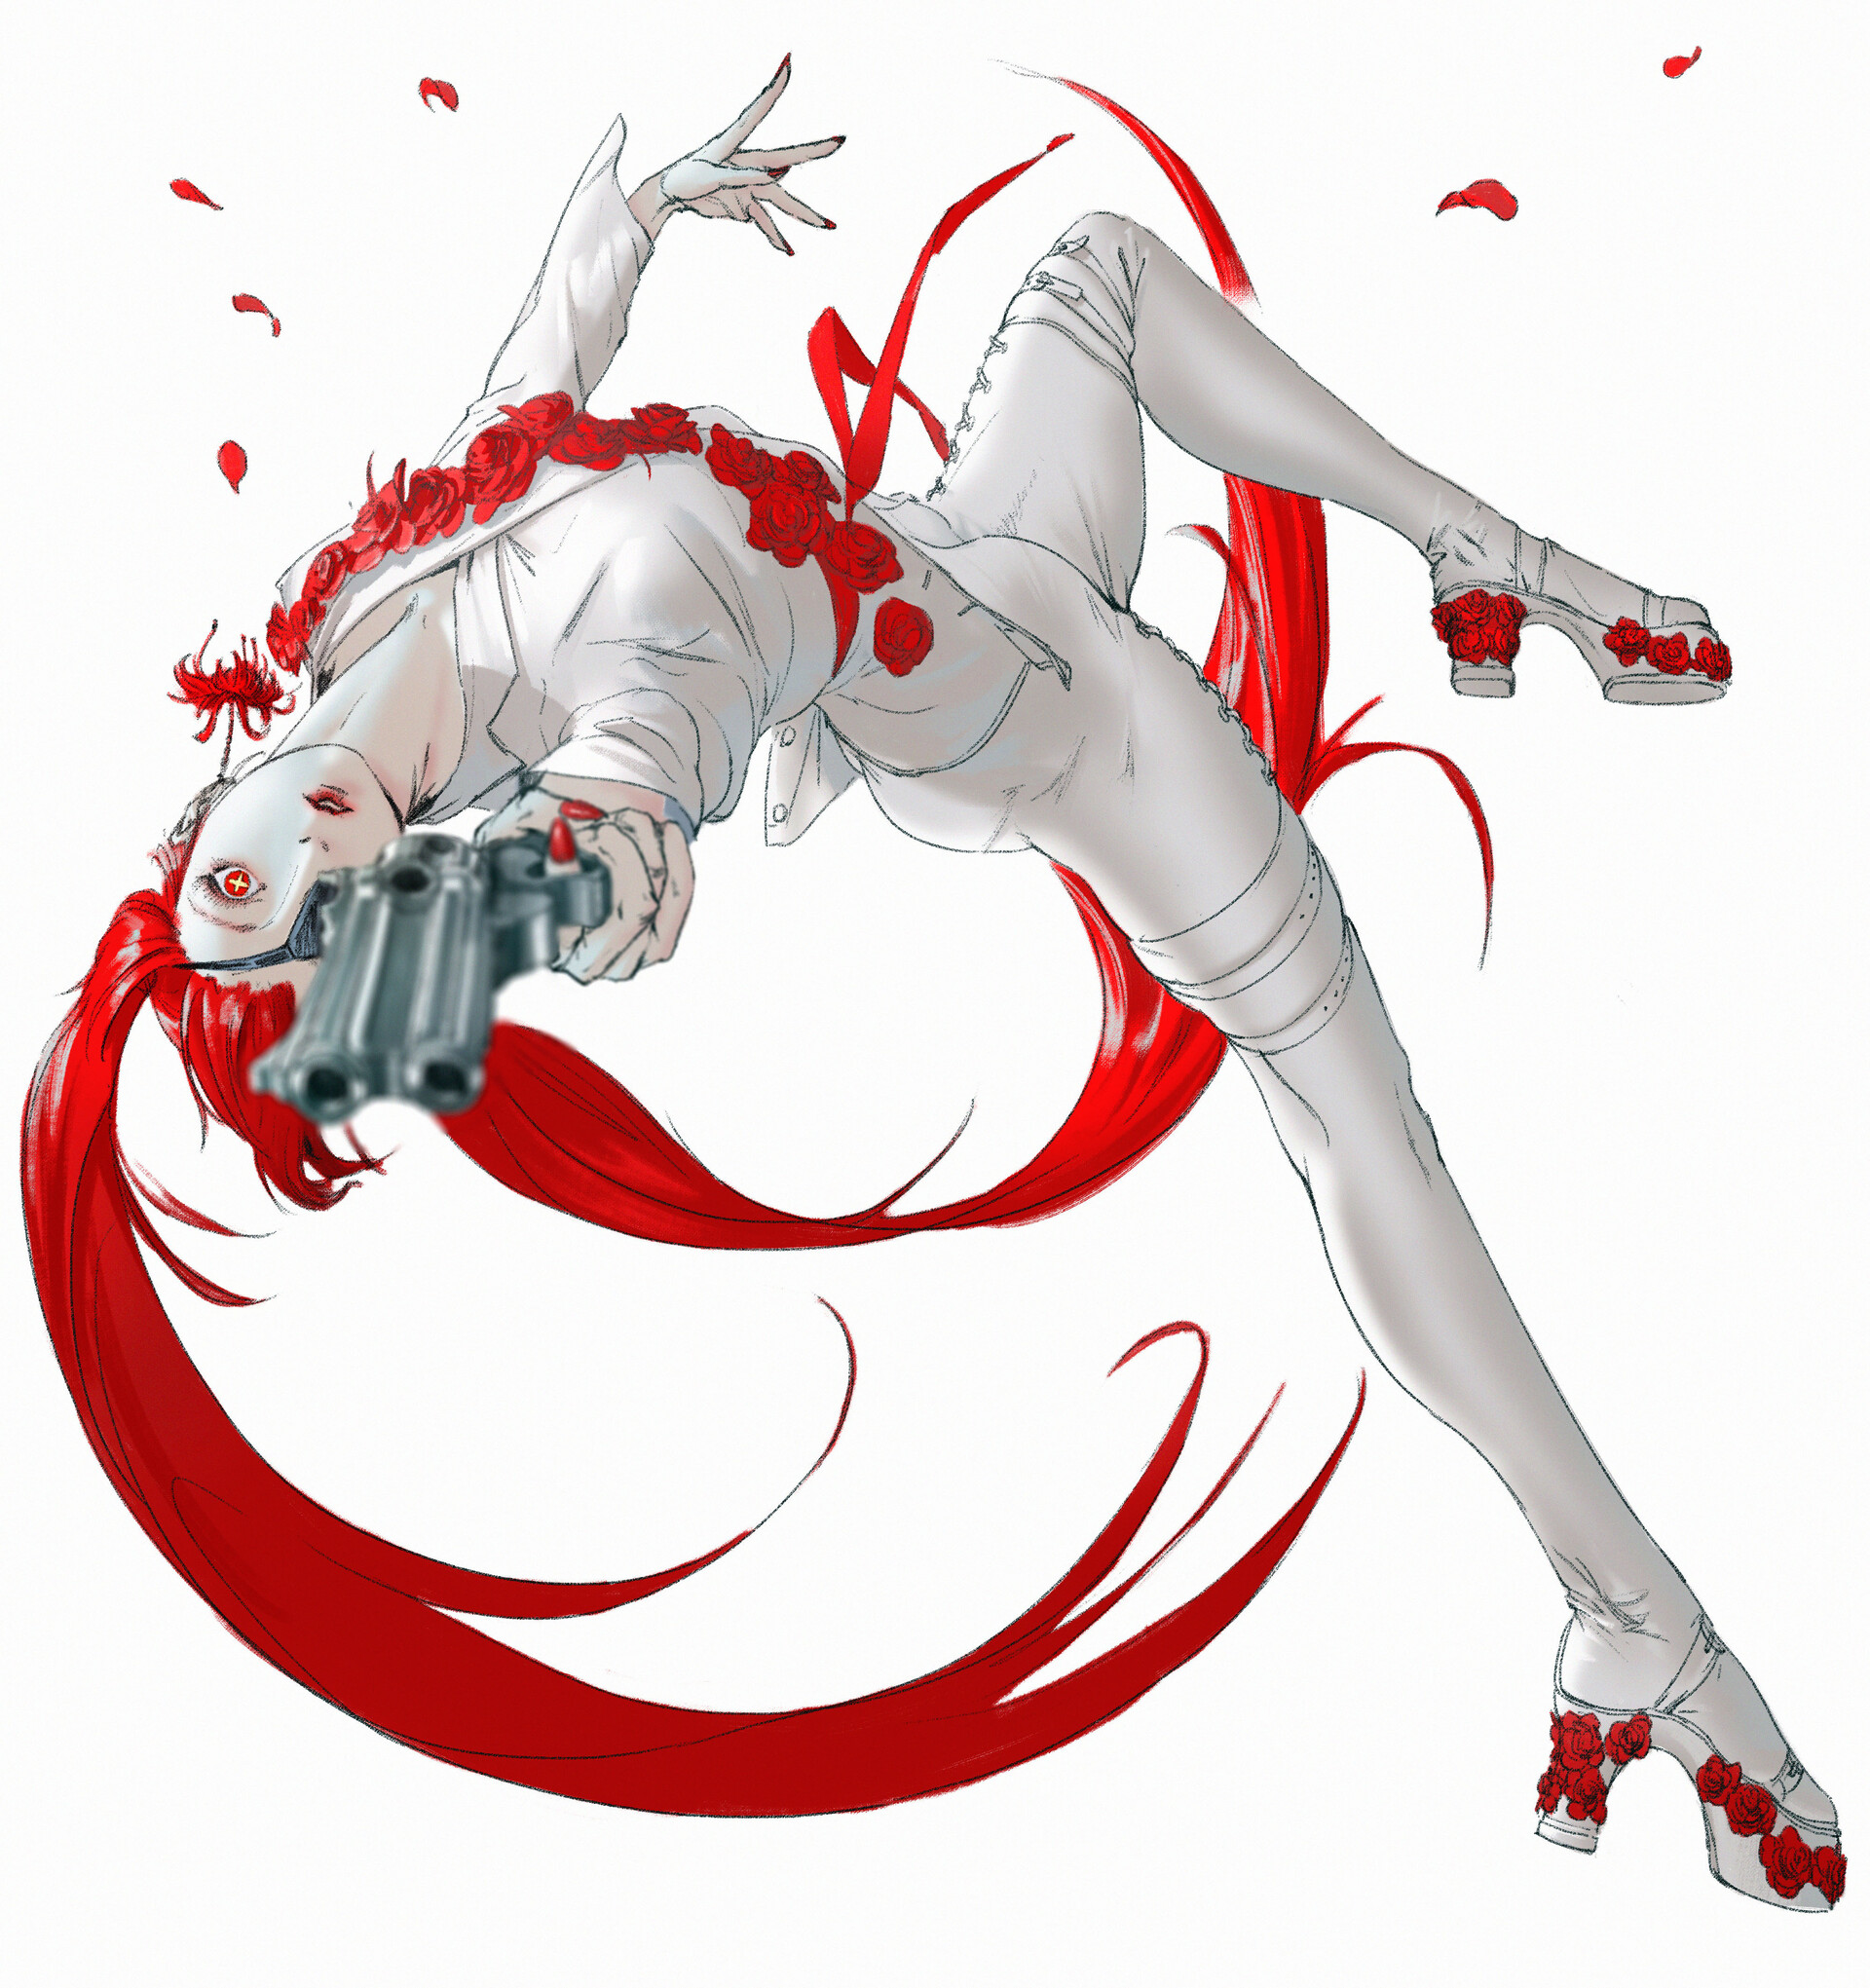 General 1920x2041 William X-A drawing women red revolver petals simple background digital art redhead gun girls with guns braids looking at viewer one eye obstructed white background long hair portrait display